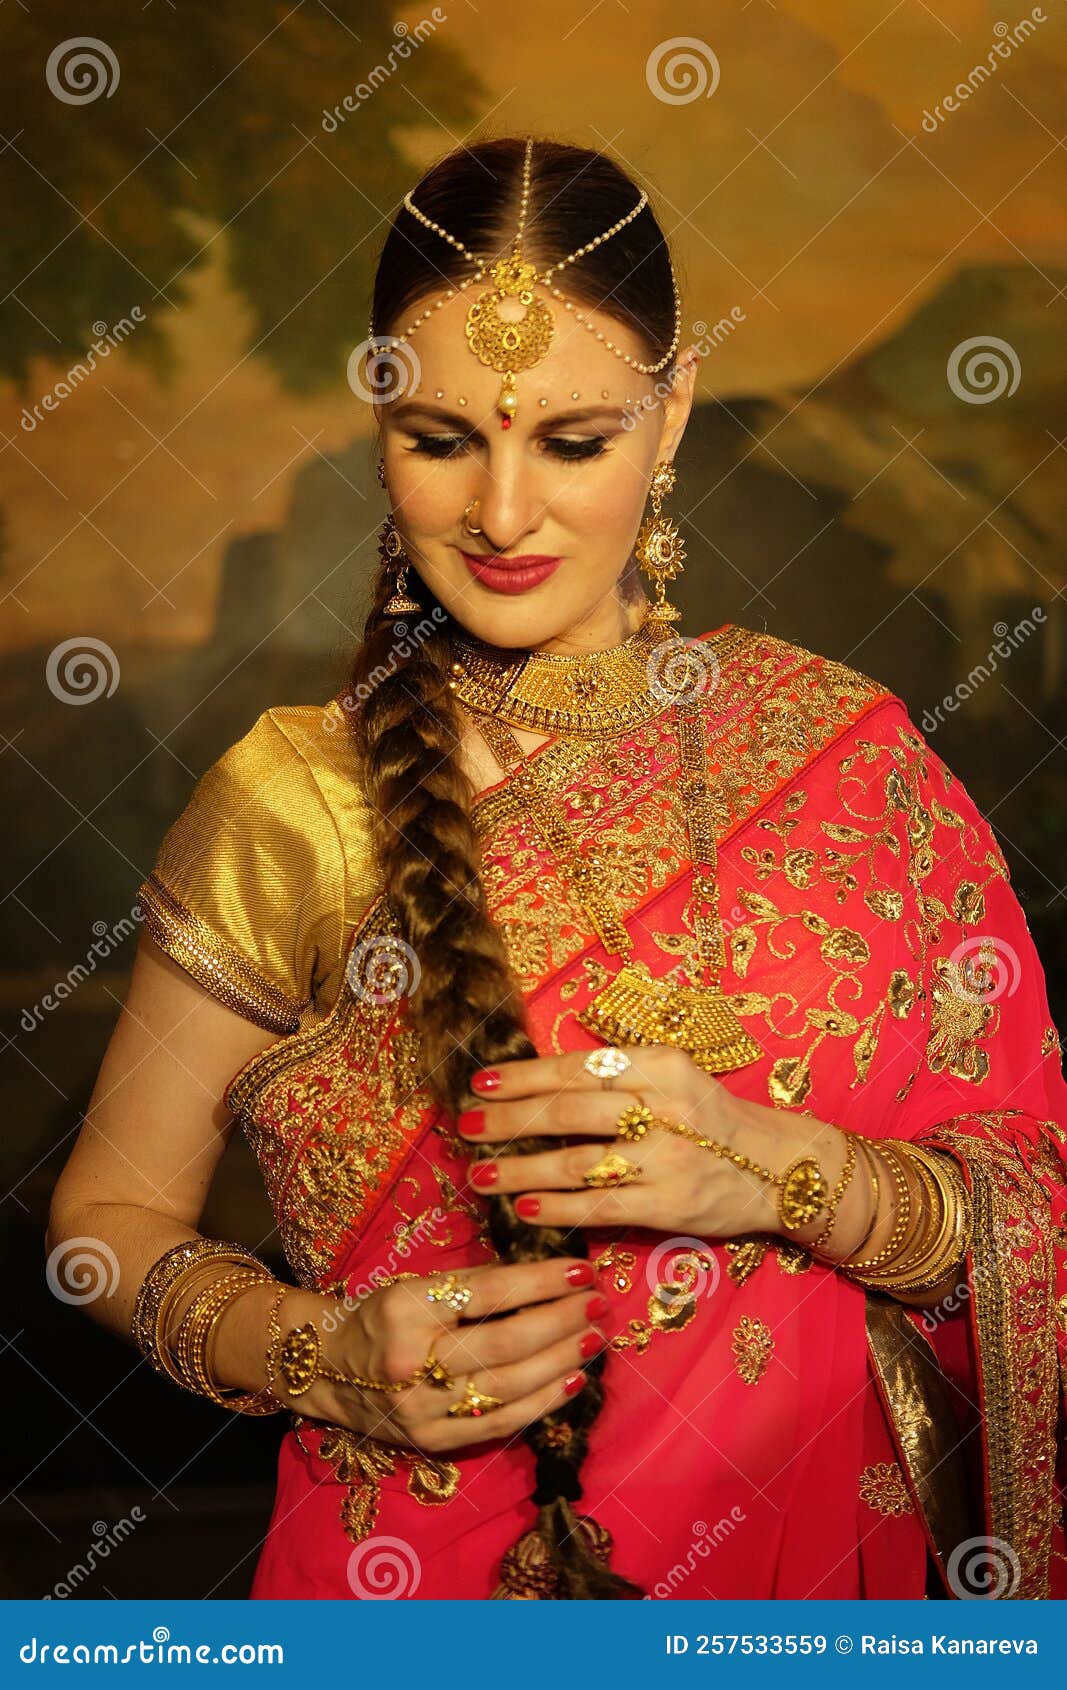 Beautiful Indian Women Wearing Saree Showing Hand Gestures while Smiling.  Stock Image - Image of design, drawing: 191694837